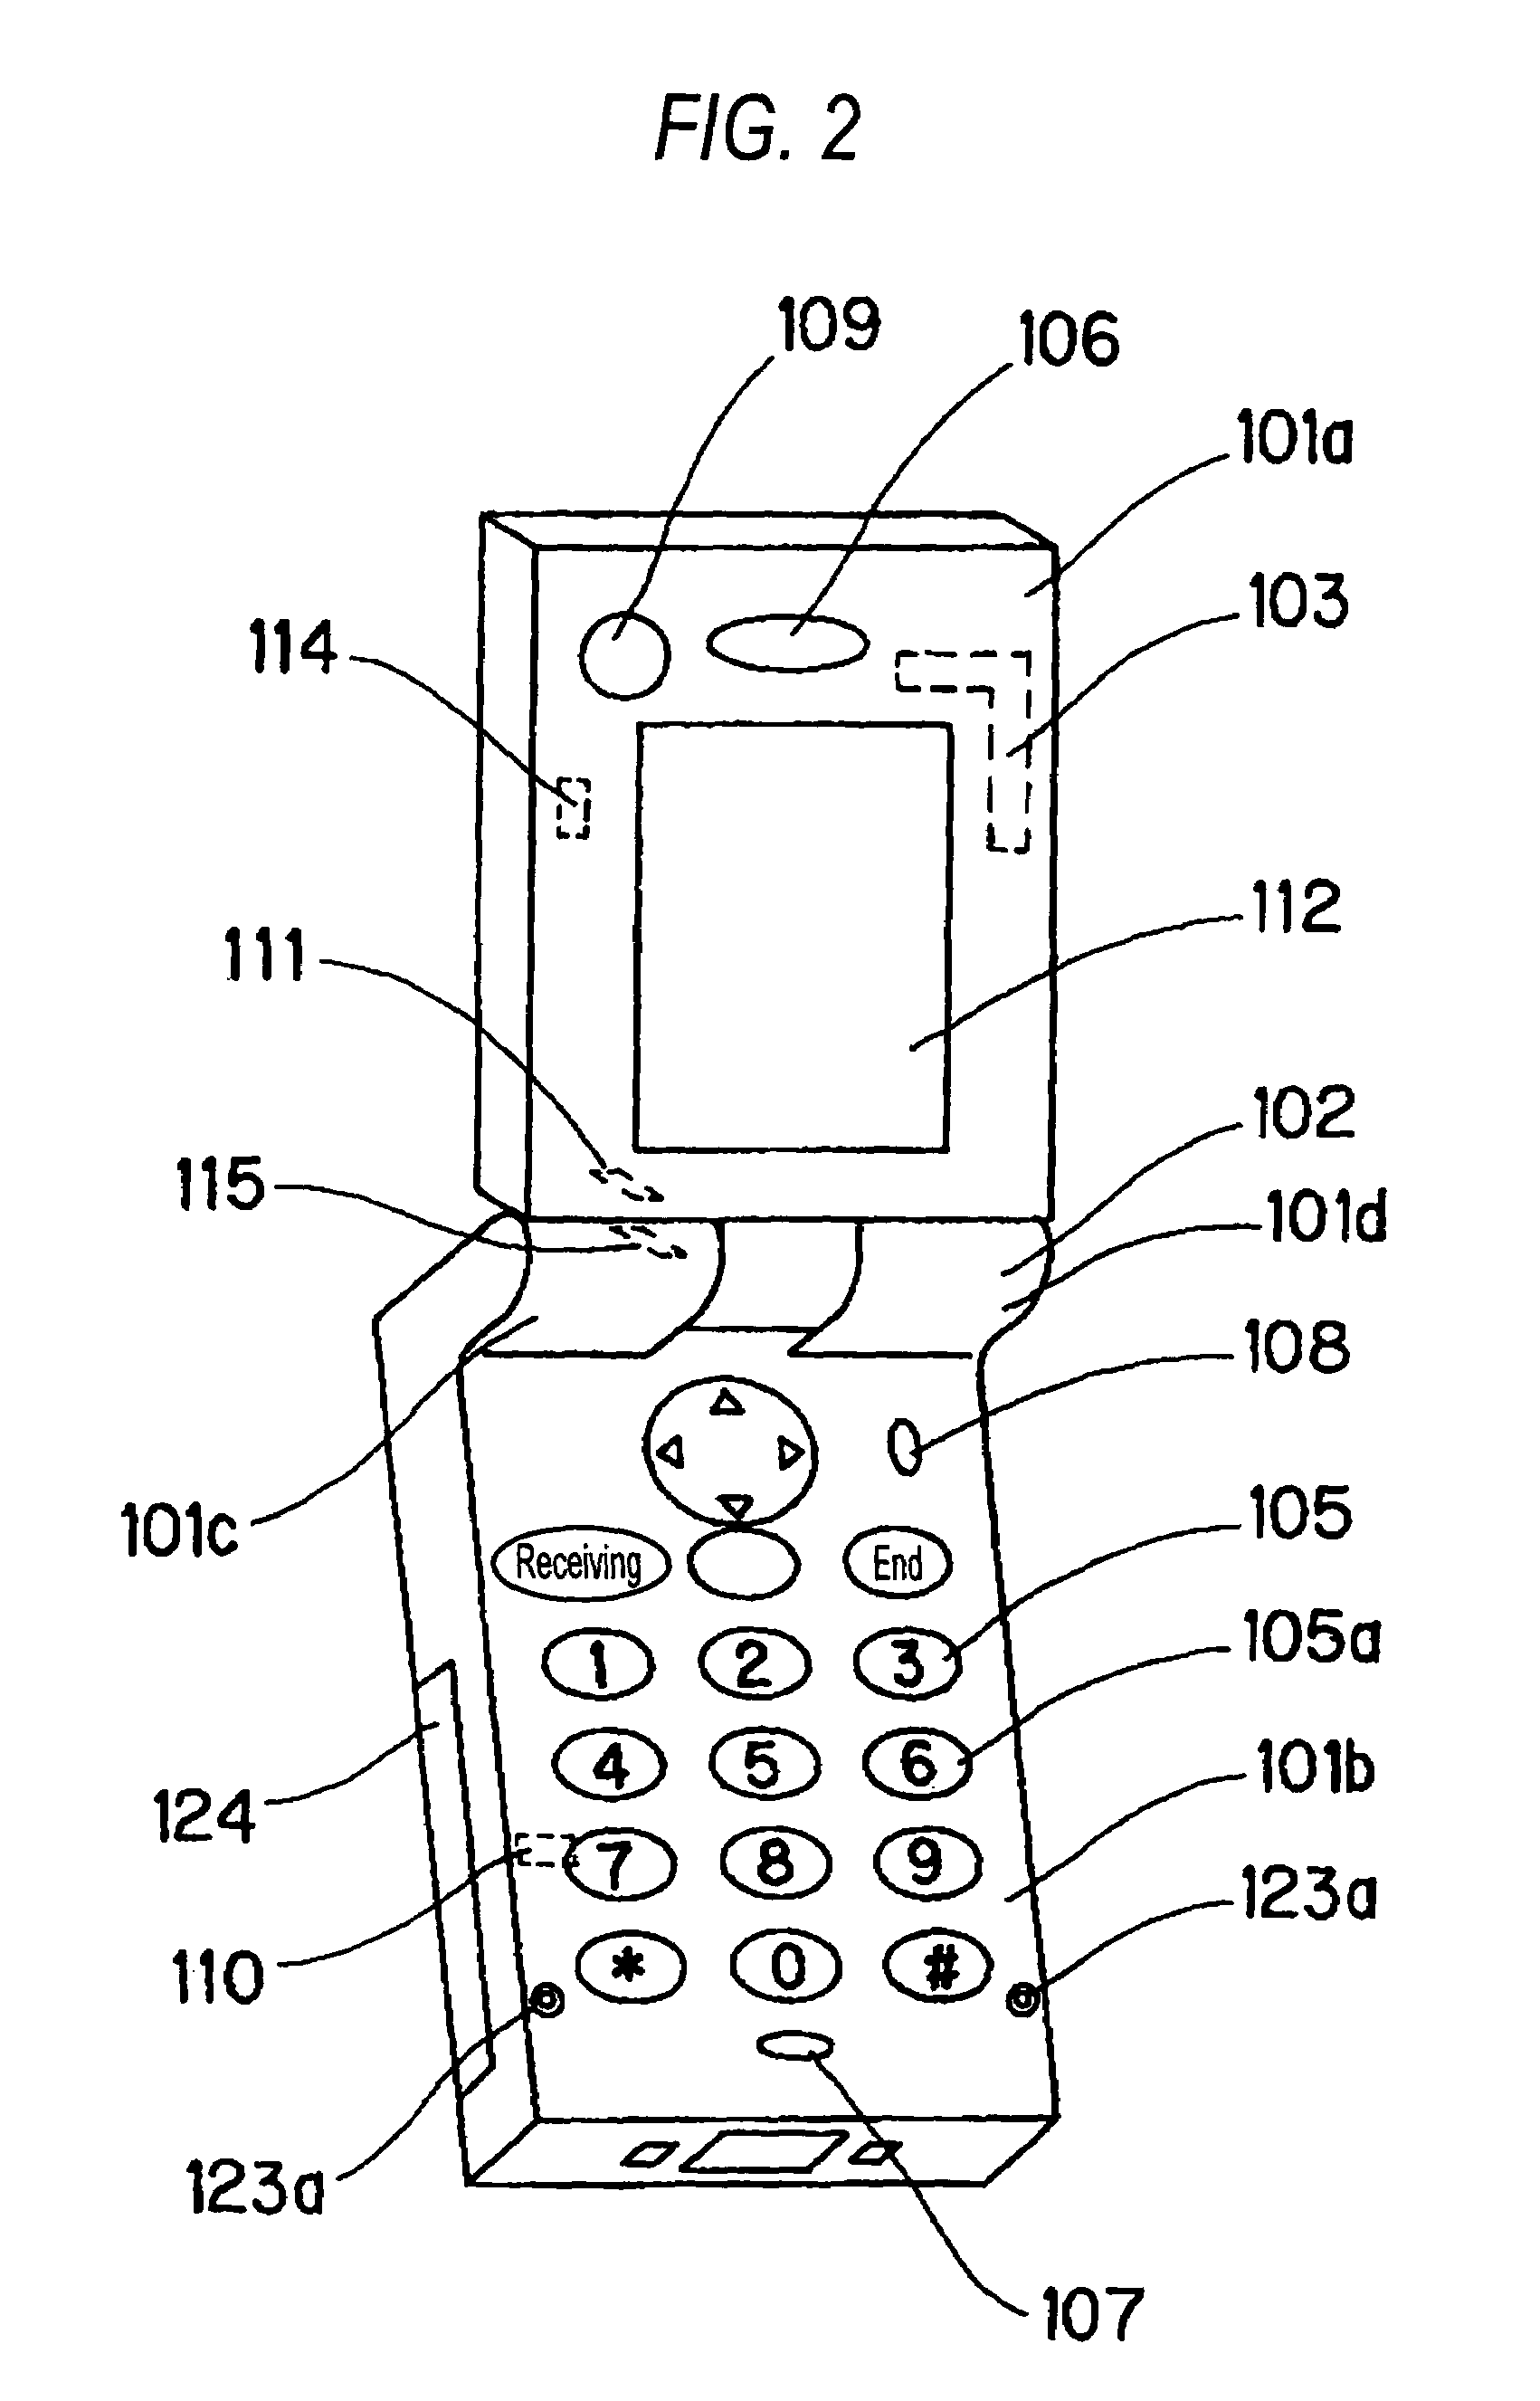 Clamshell portable wireless terminal with an upper housing and a lower housing joined together with a rotating hinge